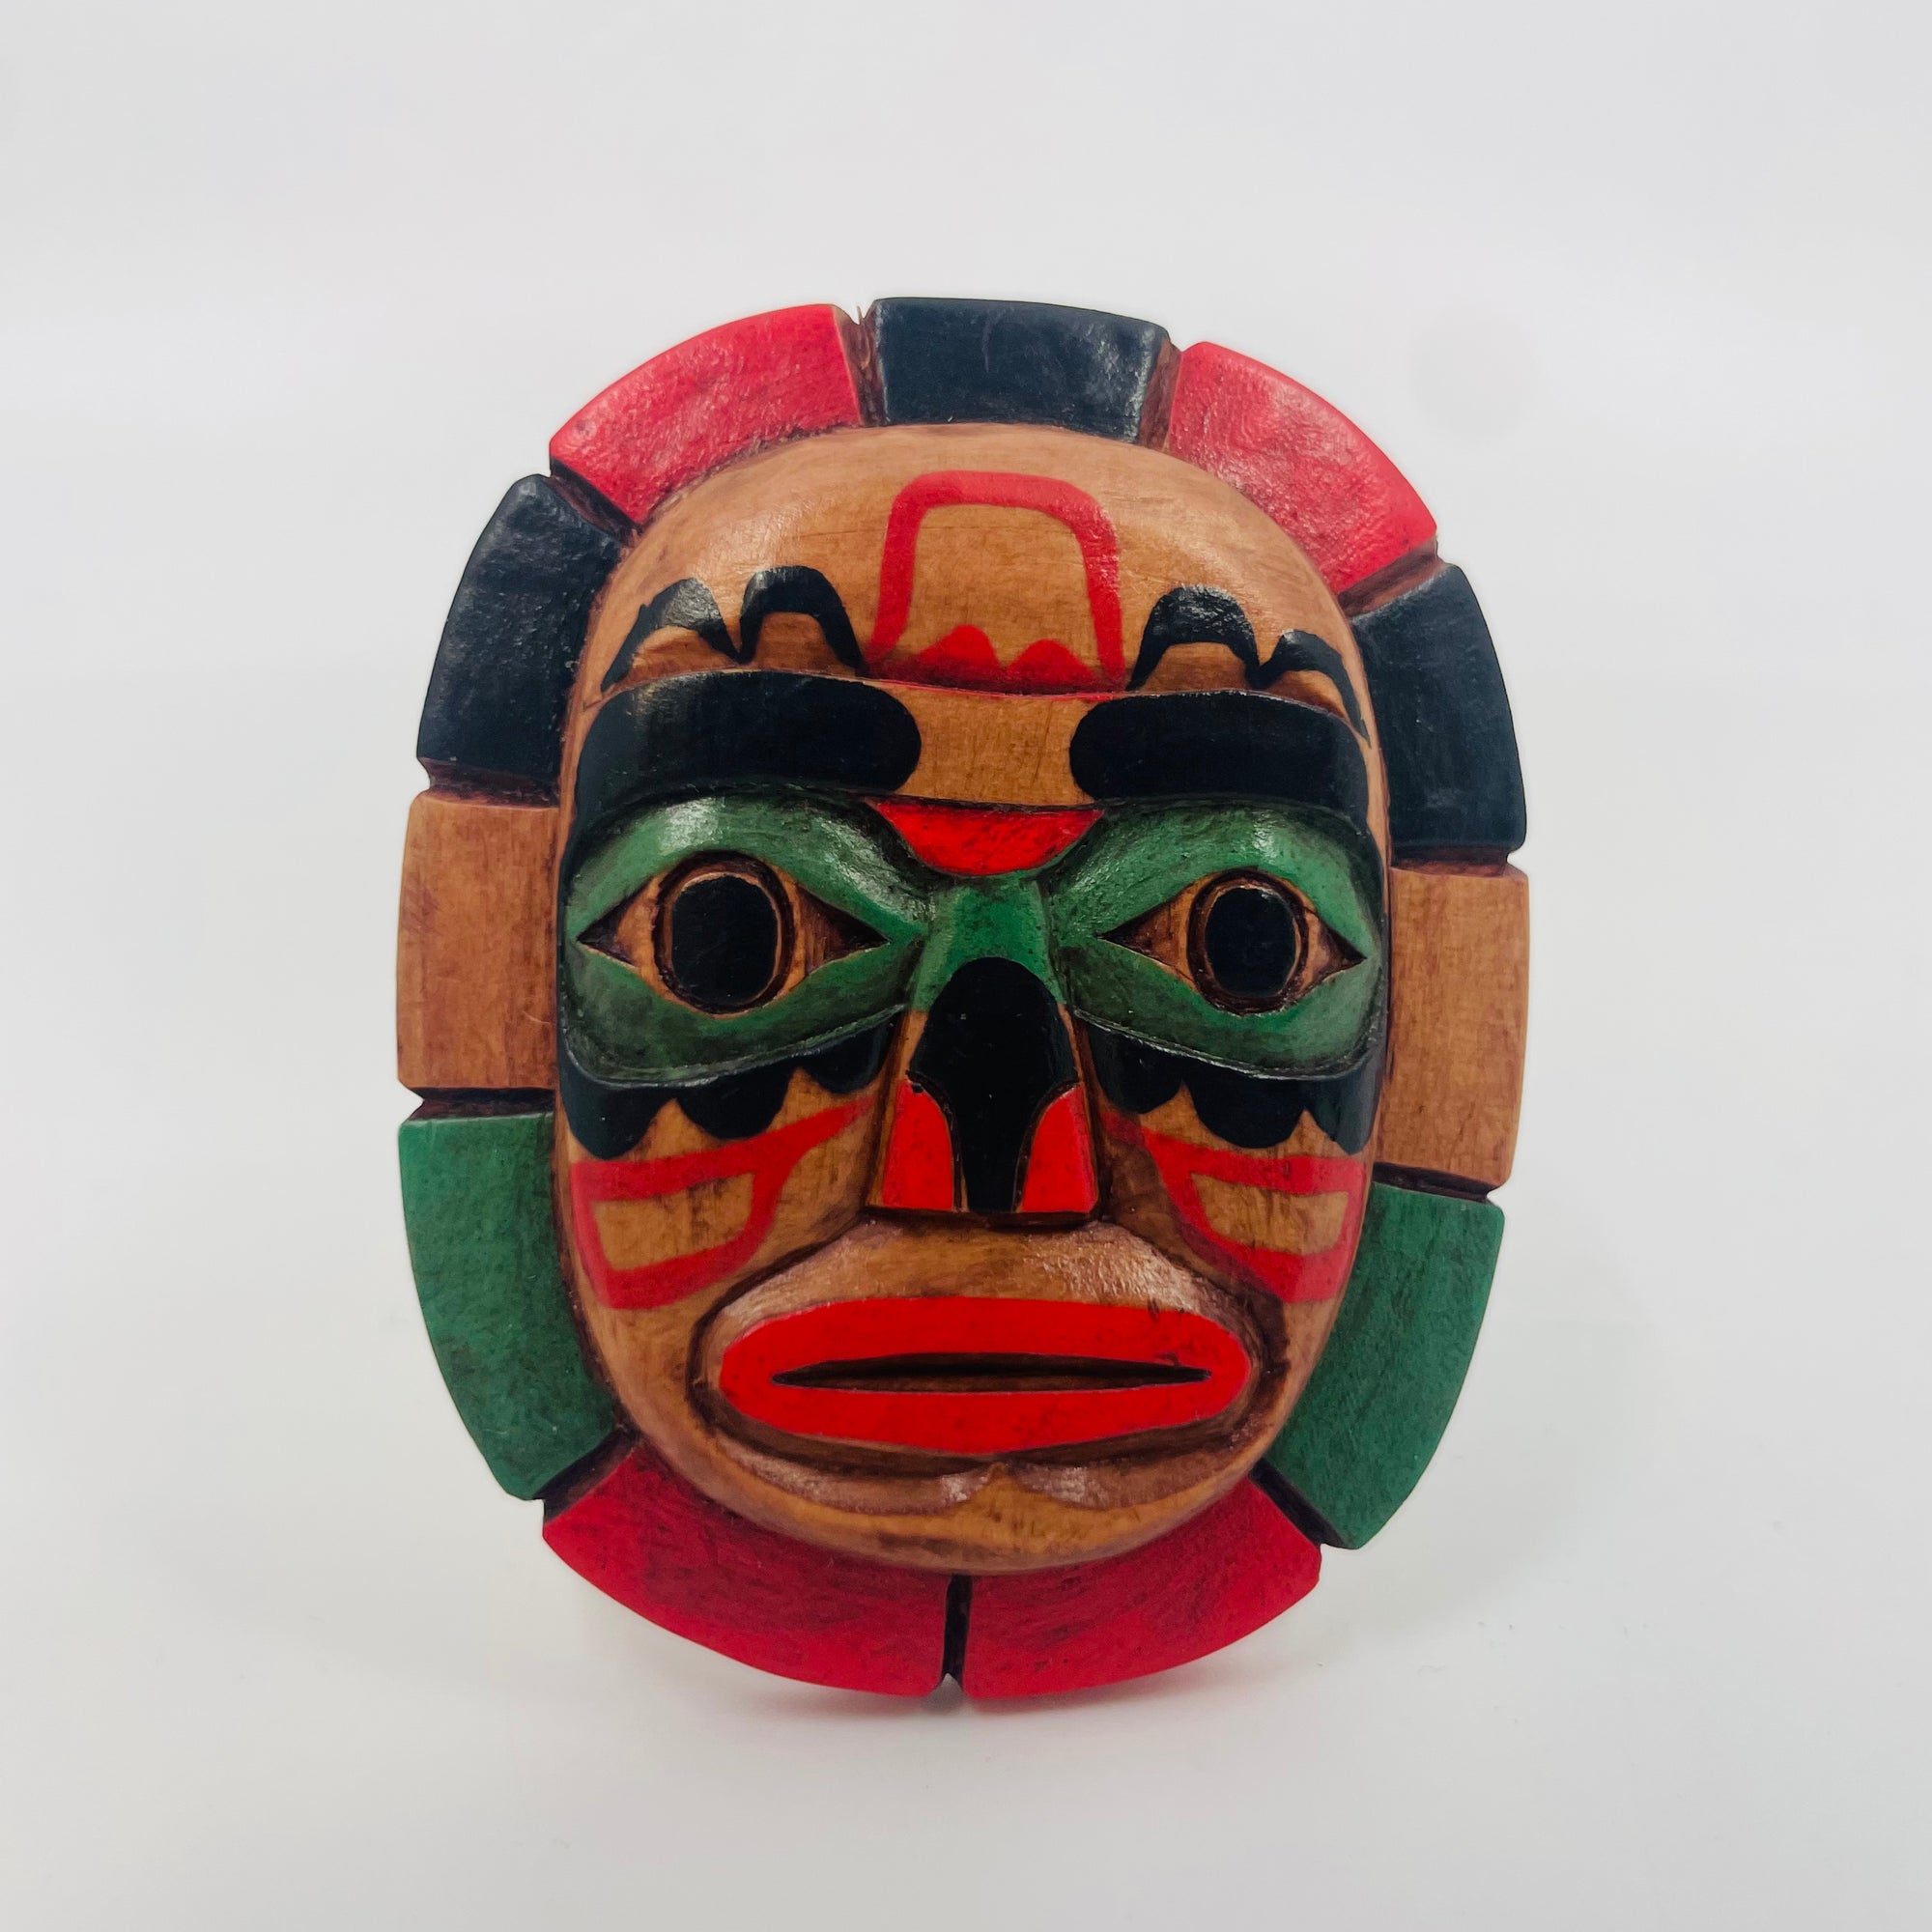 Artie George Magnets - Man Mask - WM-Magnets-7 - House of Himwitsa Native Art Gallery and Gifts